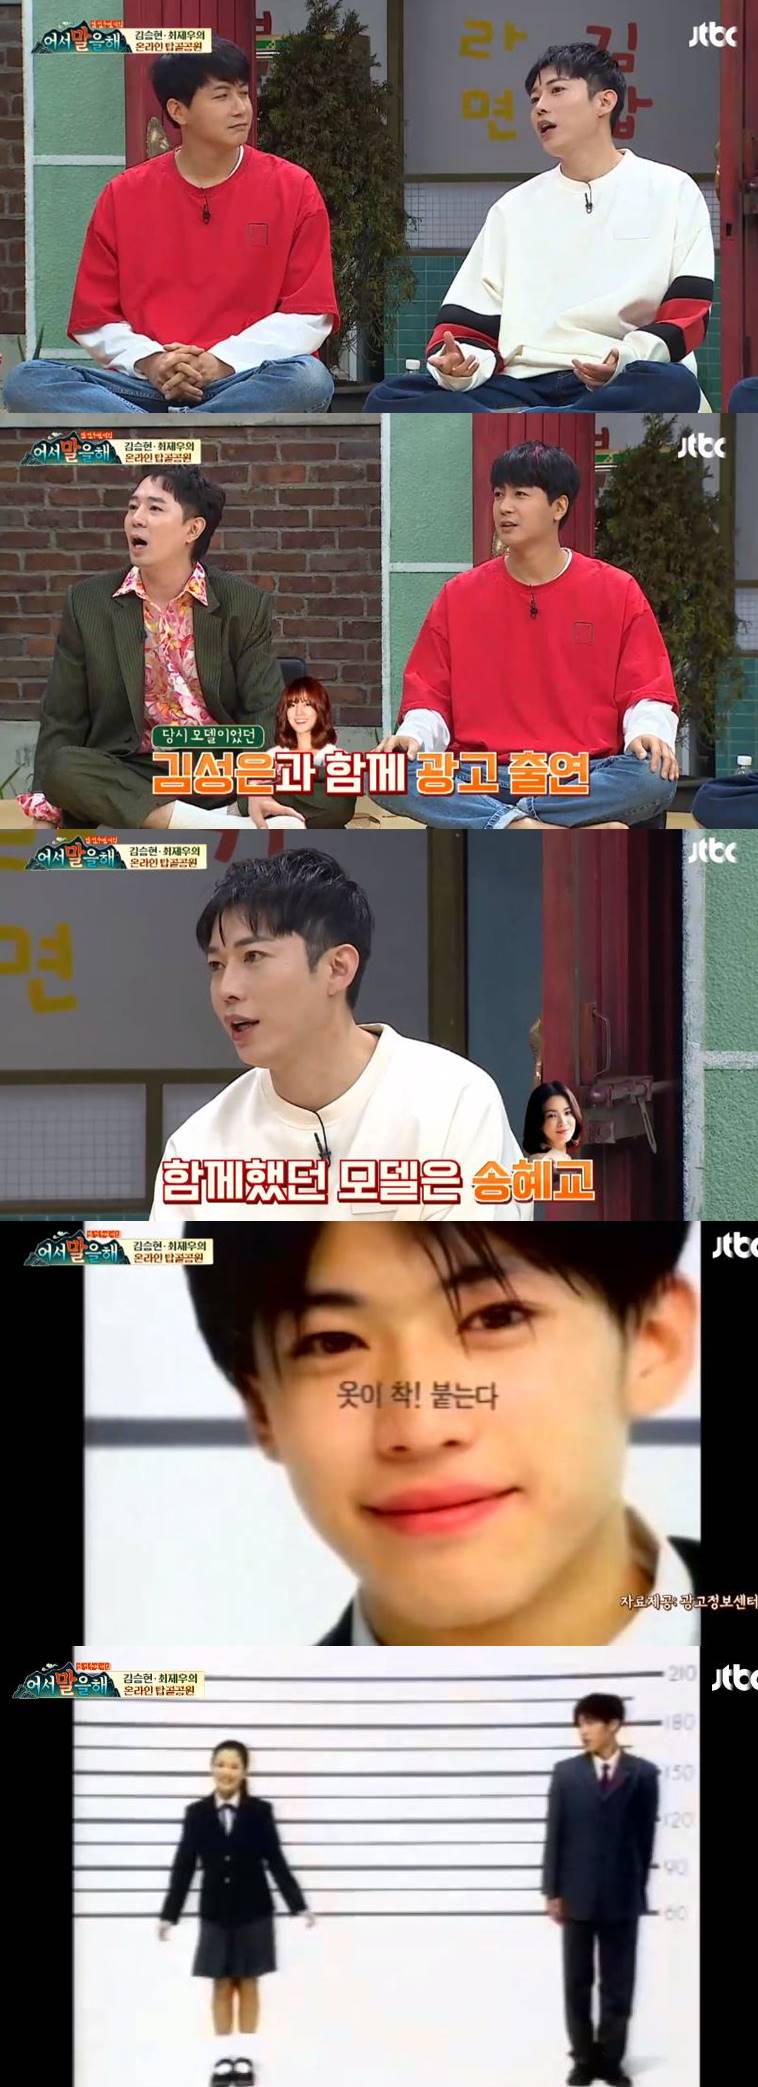 Tell me and talk singer and actor Choi recalled the time of uniform model activity in the past.Actor Kim Seung-hyun, Choi and singer Jijo appeared as guests on JTBCs Come Talk on the 22nd.When asked who was more popular on the day, Choi said, When there was no Internet, I could tell that fans came home or came to the fan letter.The postman was struggling. Kim Seung-hyun said, I was a ramen box.Choi said, There were many teenage fans in elementary school who were fan bases, and Kim Seung-hyun had a lot of fans.Kim Seung-hyun Choi has served as a uniform model in the past.Kim Seung-hyun was surprised to say, Actor Kim Sung-eun was selected as E company model.Choi said, I used to play Actor Song Hye-kyo and S uniform Model, he said. At that time, I was popular to wear hoodies in uniform.Choi and Song Hye-kyo attracted attention with their uniform appearance in the commercial video released on the air.